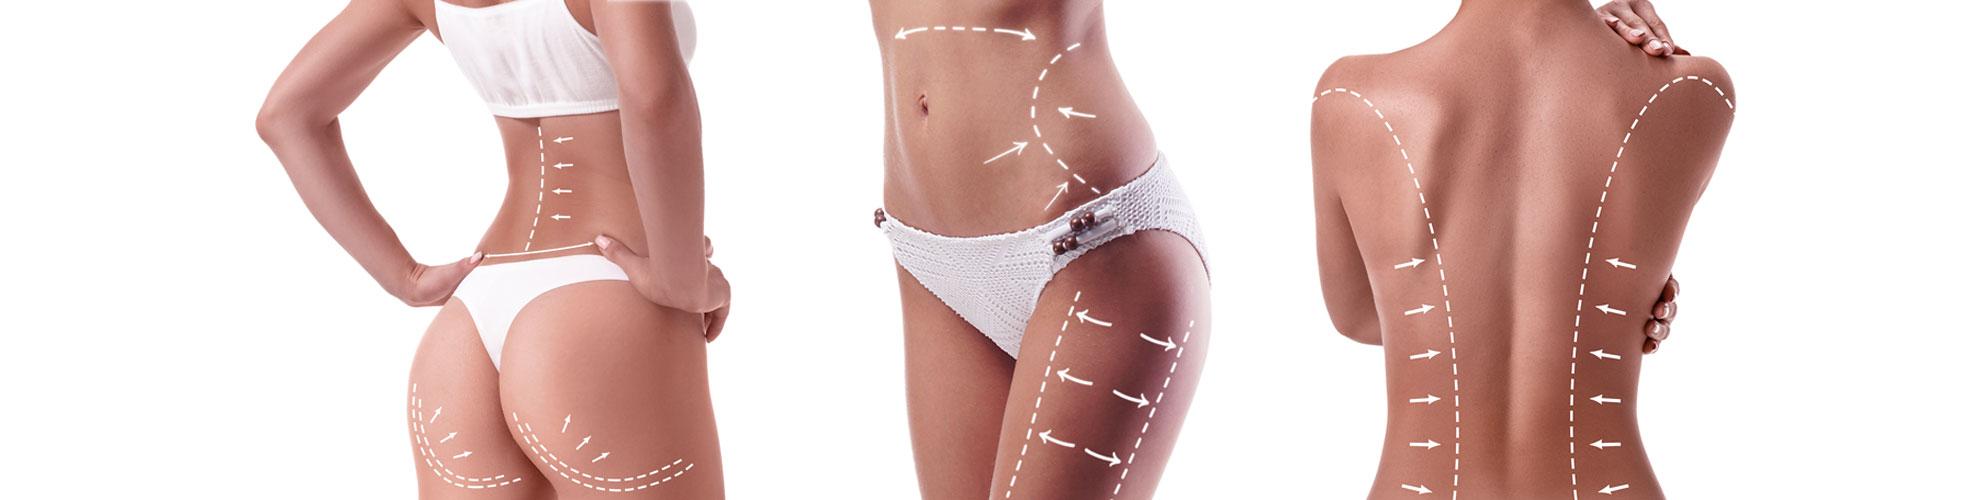 Body Contouring, Body Cosmetic Surgery